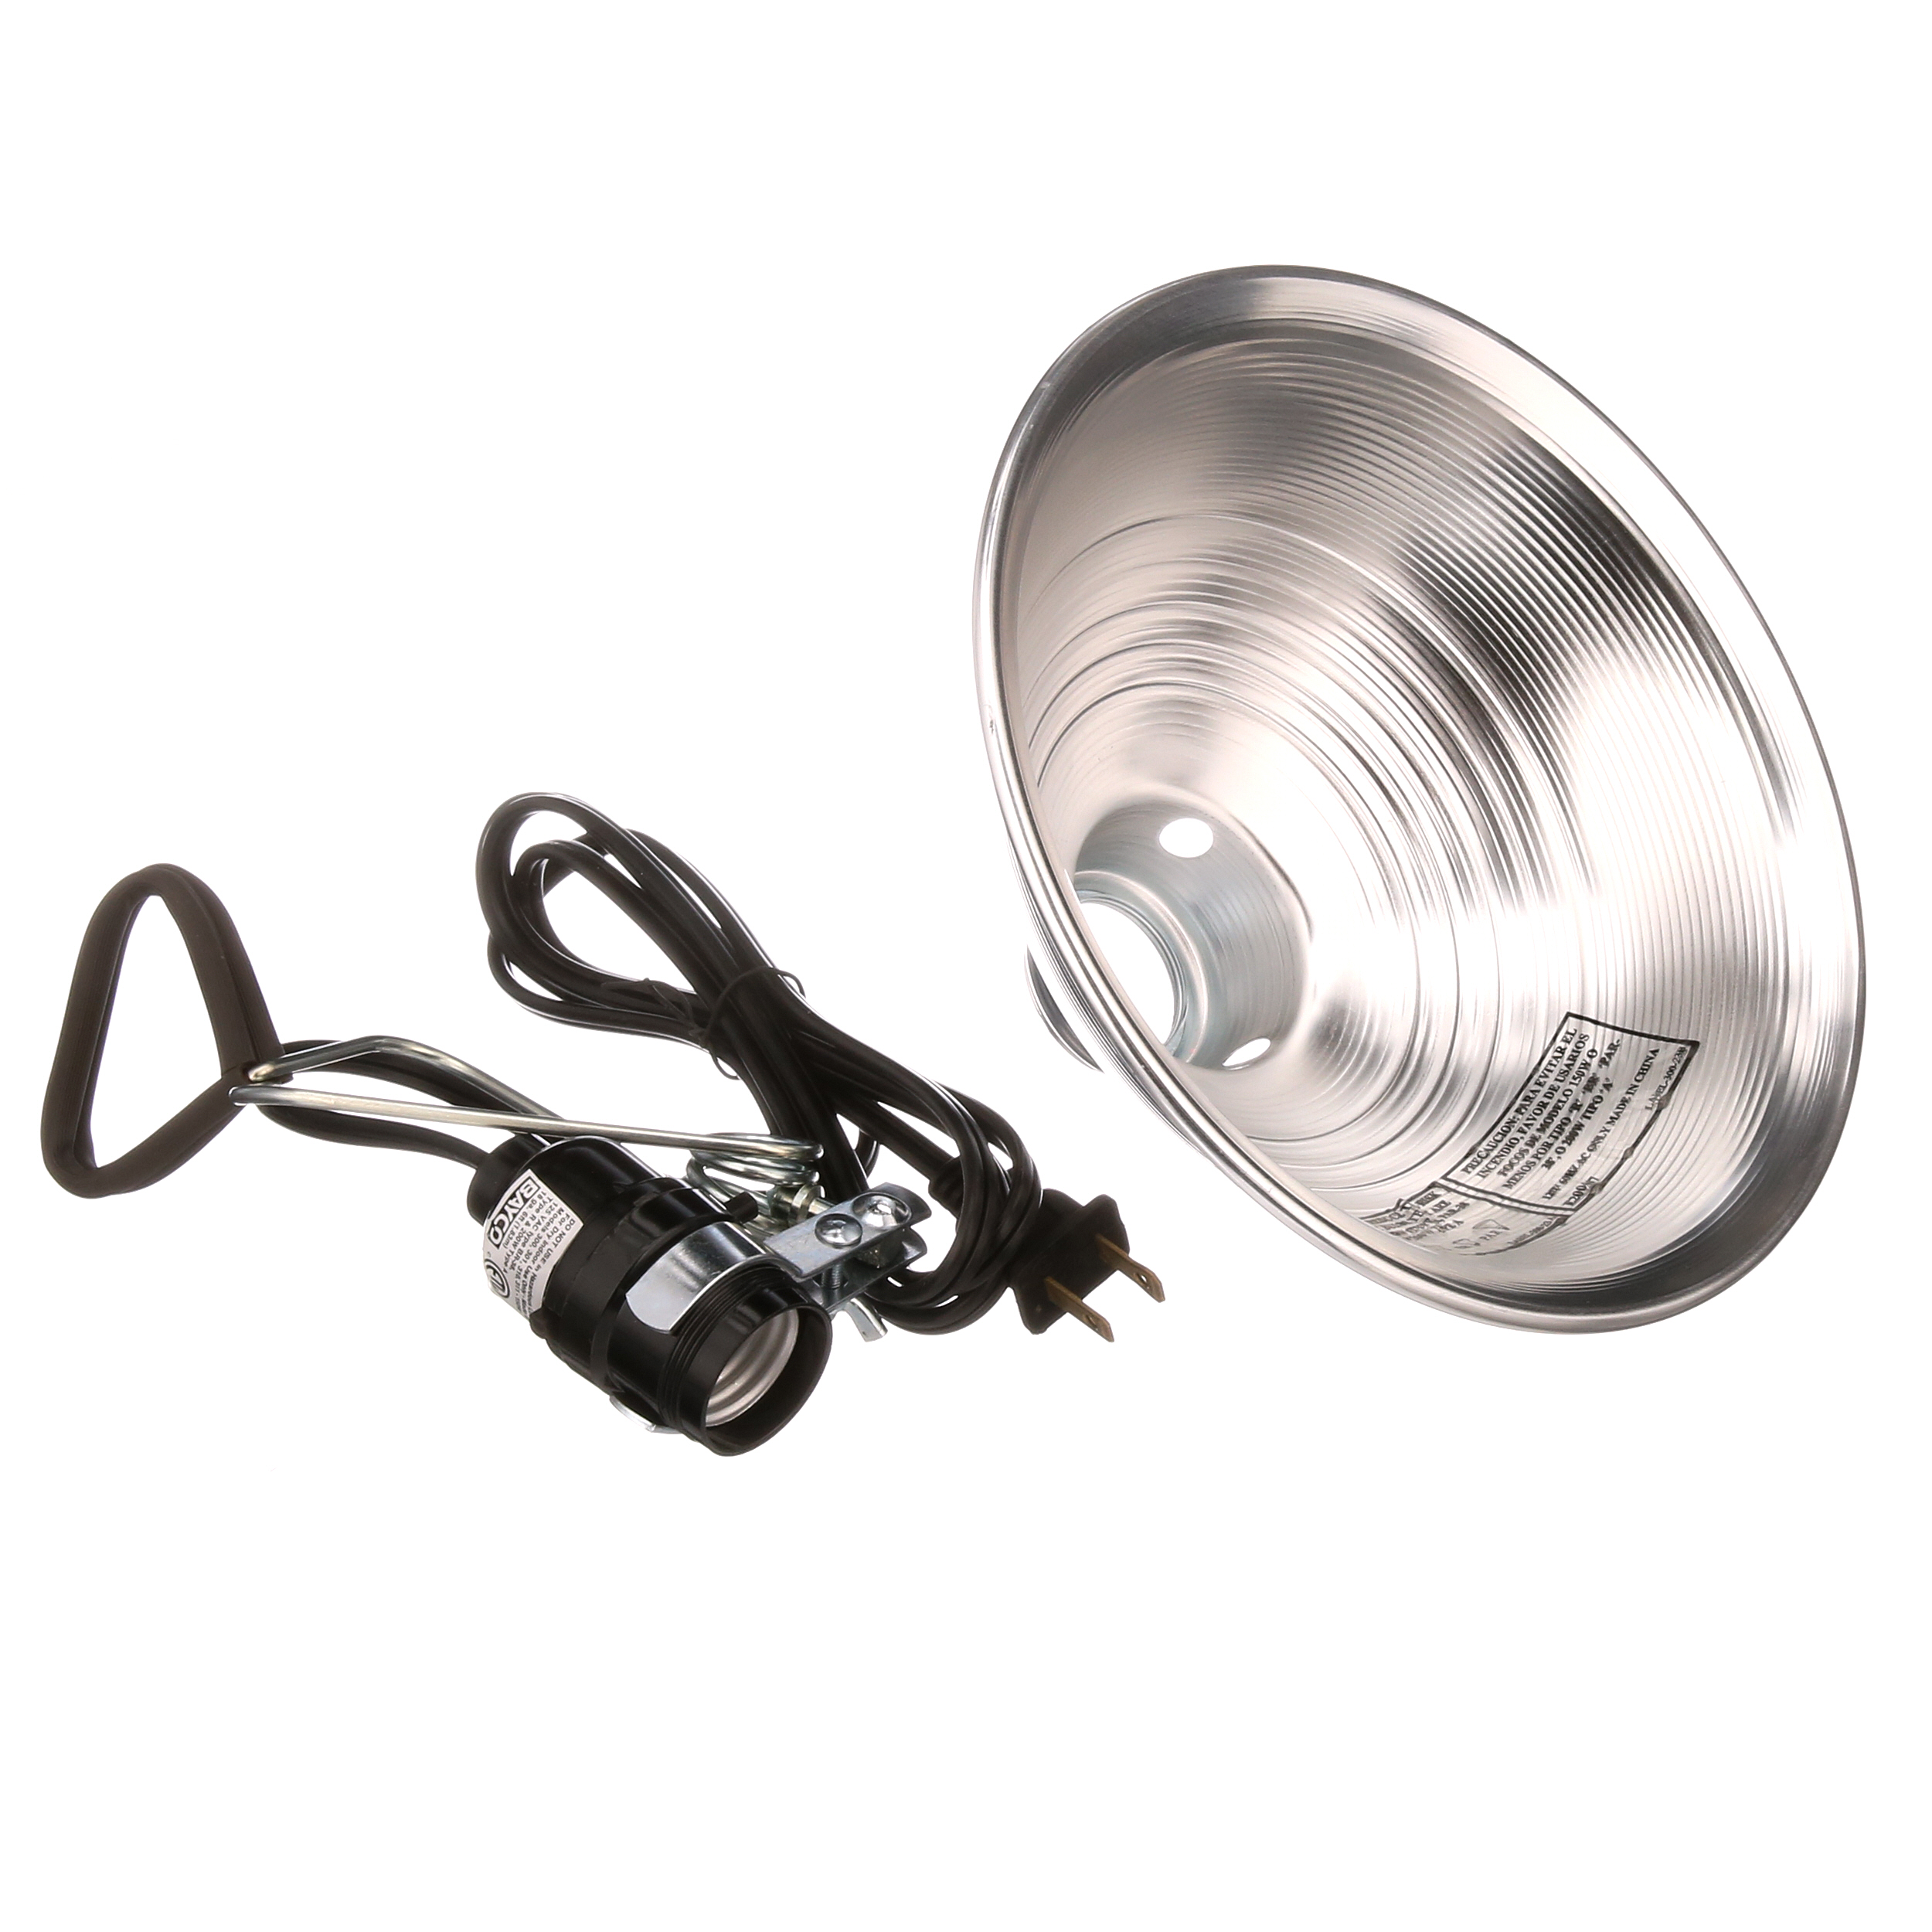 Bayco SL-300 8.5-inch Clamp Light with Aluminum Reflector - image 5 of 11